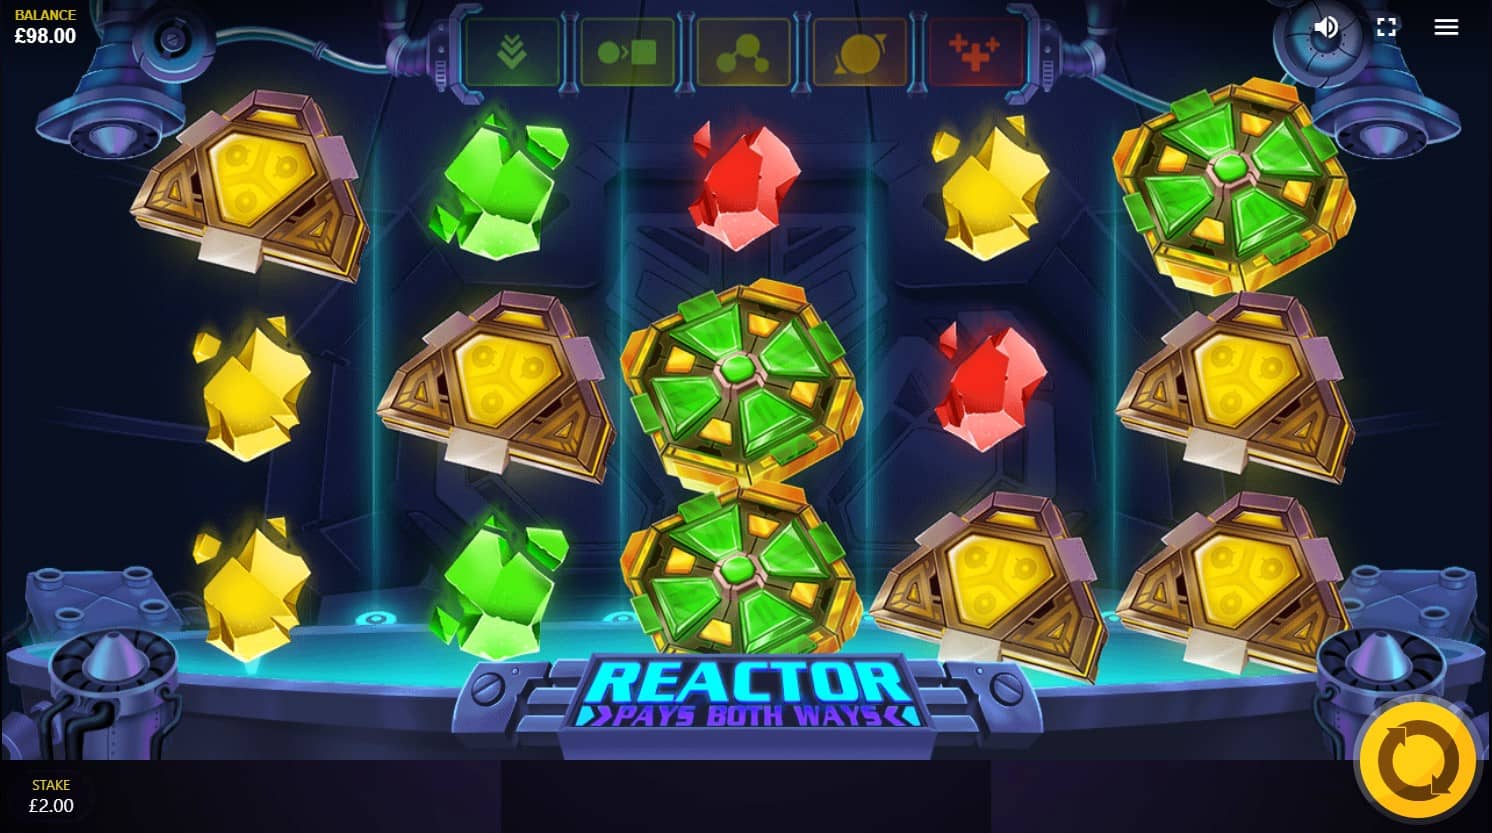 Reactor slot Free Spins